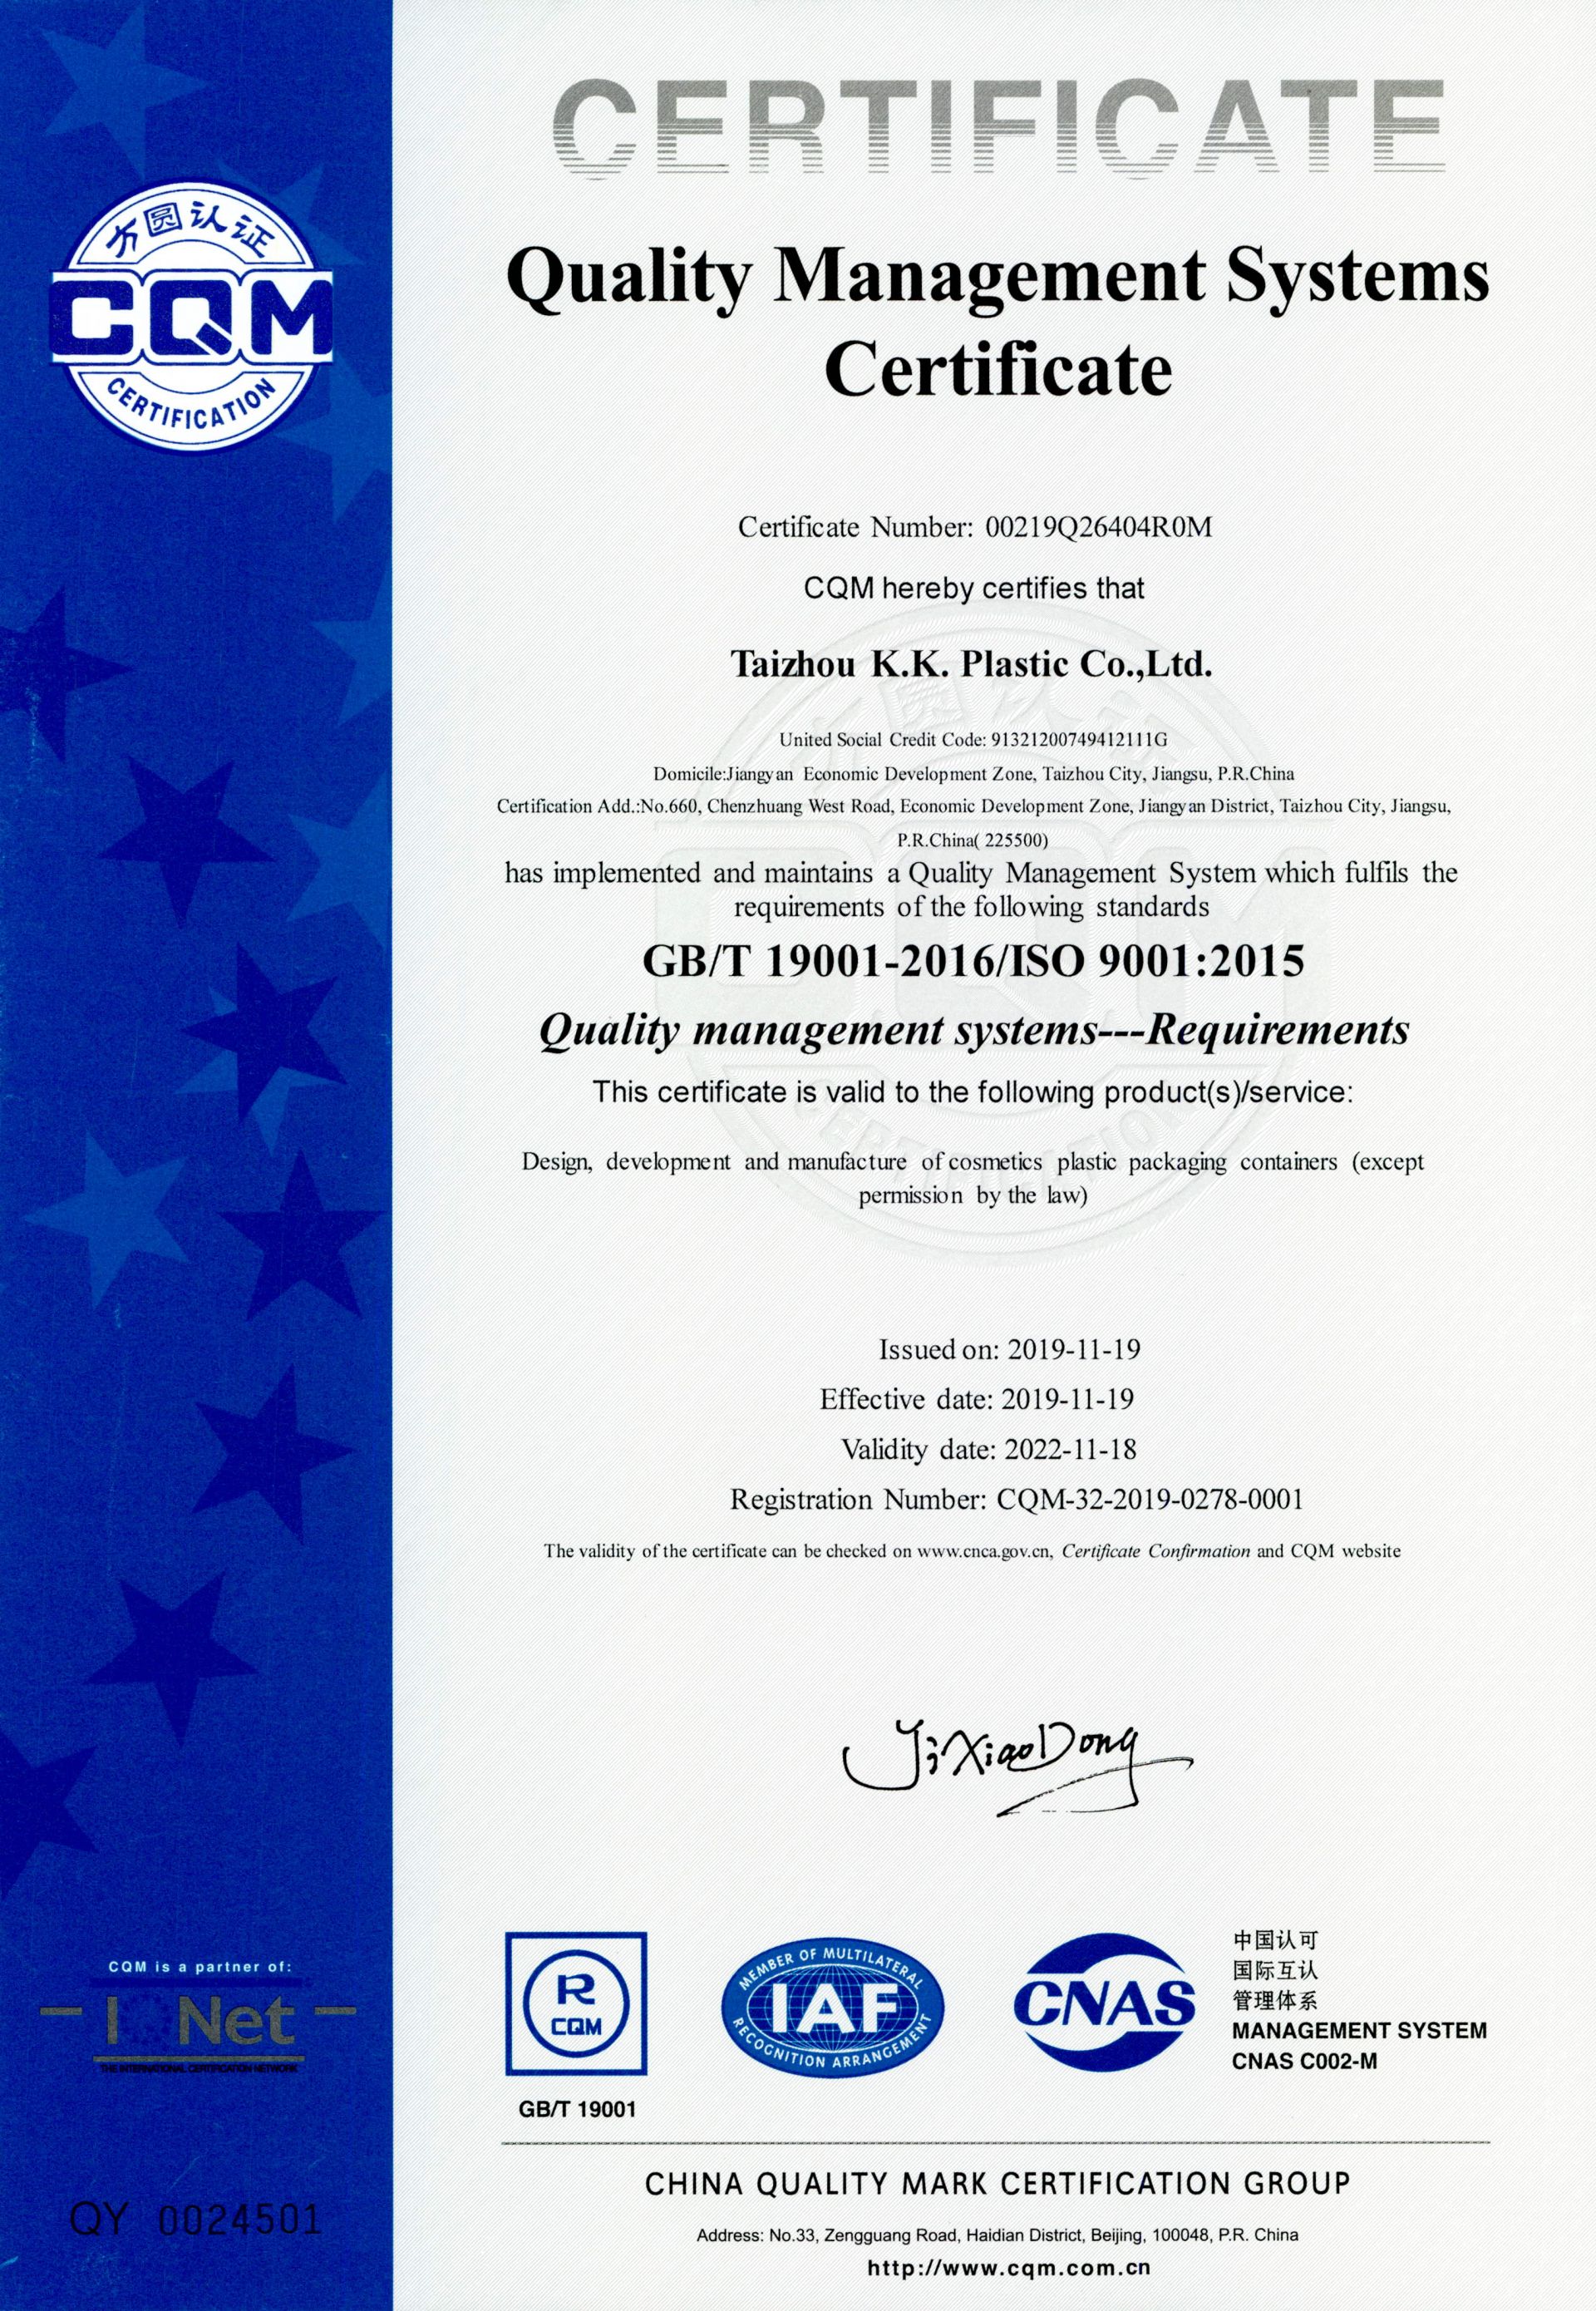 Chứng chỉ ISO 9001